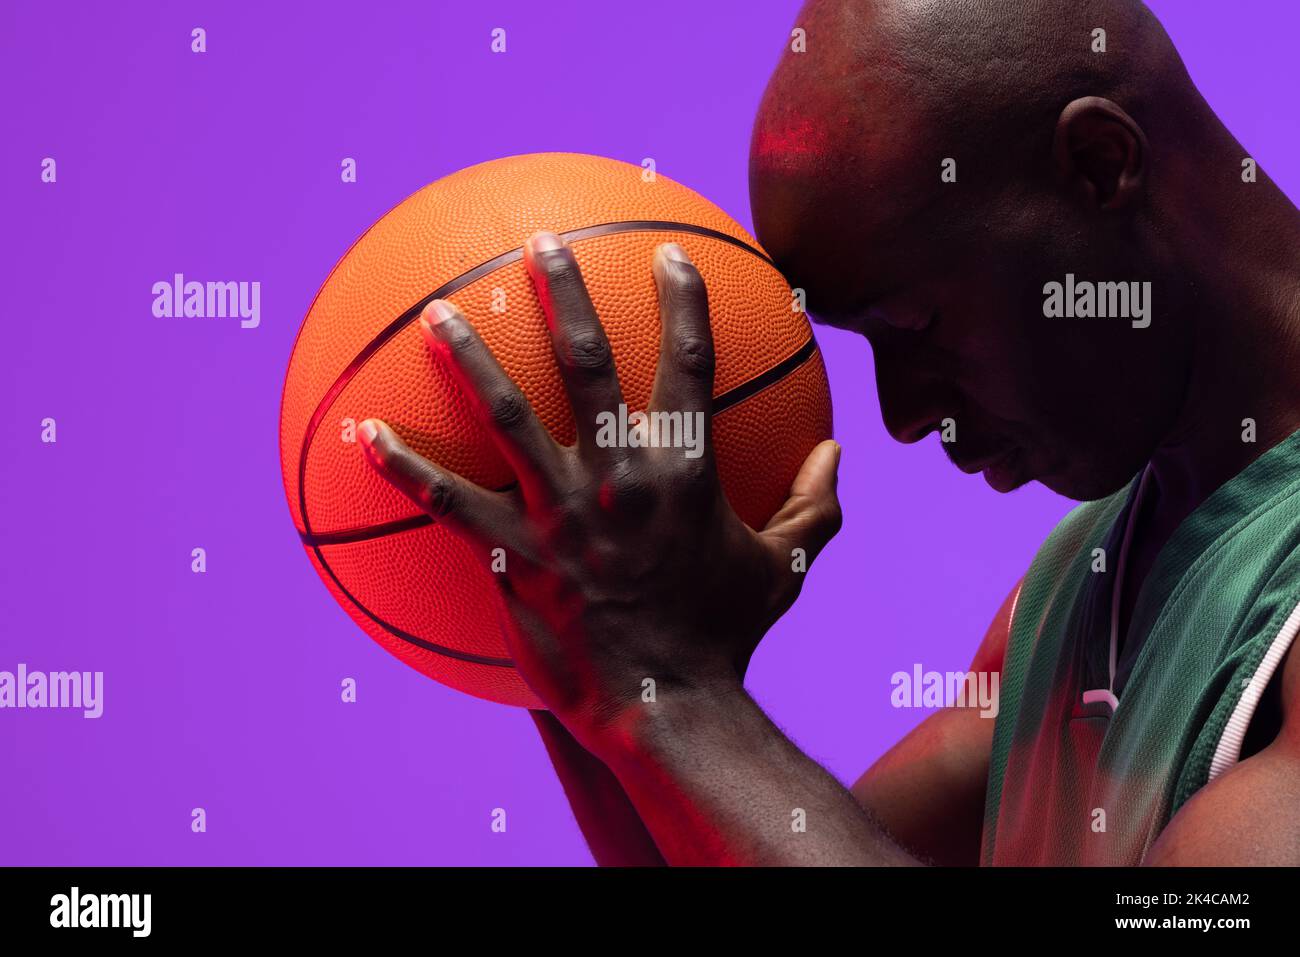 Image of african american basketball player with basketball on neon purple background. Sports and competition concept. Stock Photo